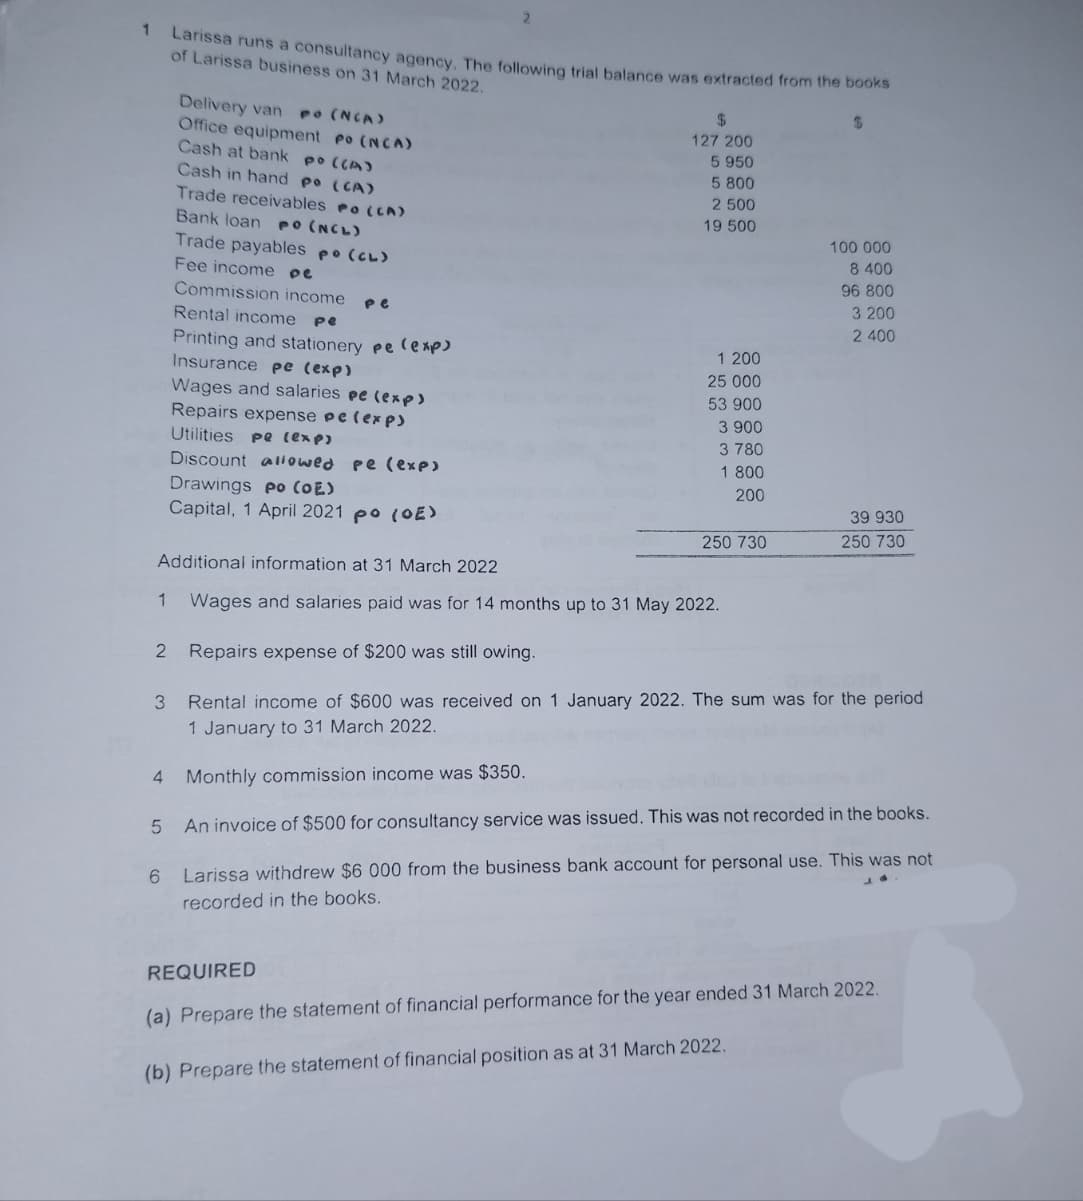 1
1
3
4
6
Larissa runs a consultancy agency. The following trial balance was extracted from the books
of Larissa business on 31 March 2022.
$
Delivery van PO (NCA)
Office equipment Po (NCA)
Cash at bank po ((A)
Cash in hand po (CA)
Trade receivables Po (CA)
Bank loan PO (NCL)
Trade payables po (CL)
Fee income pe
Commission income
Rental income pe
Printing and stationery pe (exp)
Insurance pe (exp)
pe
2
Wages and salaries pe (exp)
Repairs expense pe (exp)
Utilities pe (exp)
Discount allowed pe (exp)
Drawings po (OE)
Capital, 1 April 2021 po (OE)
$
127 200
5 950
5 800
2 500
19 500
1 200
25 000
53 900
3 900
3 780
1 800
200
Additional information at 31 March 2022
Wages and salaries paid was for 14 months up to 31 May 2022.
2 Repairs expense of $200 was still owing.
Rental income of $600 was received on 1 January 2022. The sum was for the period
1 January to 31 March 2022.
Monthly commission income was $350.
5 An invoice of $500 for consultancy service was issued. This was not recorded in the books.
This was not
Larissa withdrew $6 000 from the business bank account for personal use.
recorded in the books.
250 730
100 000
8 400
96 800
3 200
2 400
39 930
250 730
A
REQUIRED
(a) Prepare the statement of financial performance for the year ended 31 March 2022.
(b) Prepare the statement of financial position as at 31 March 2022.